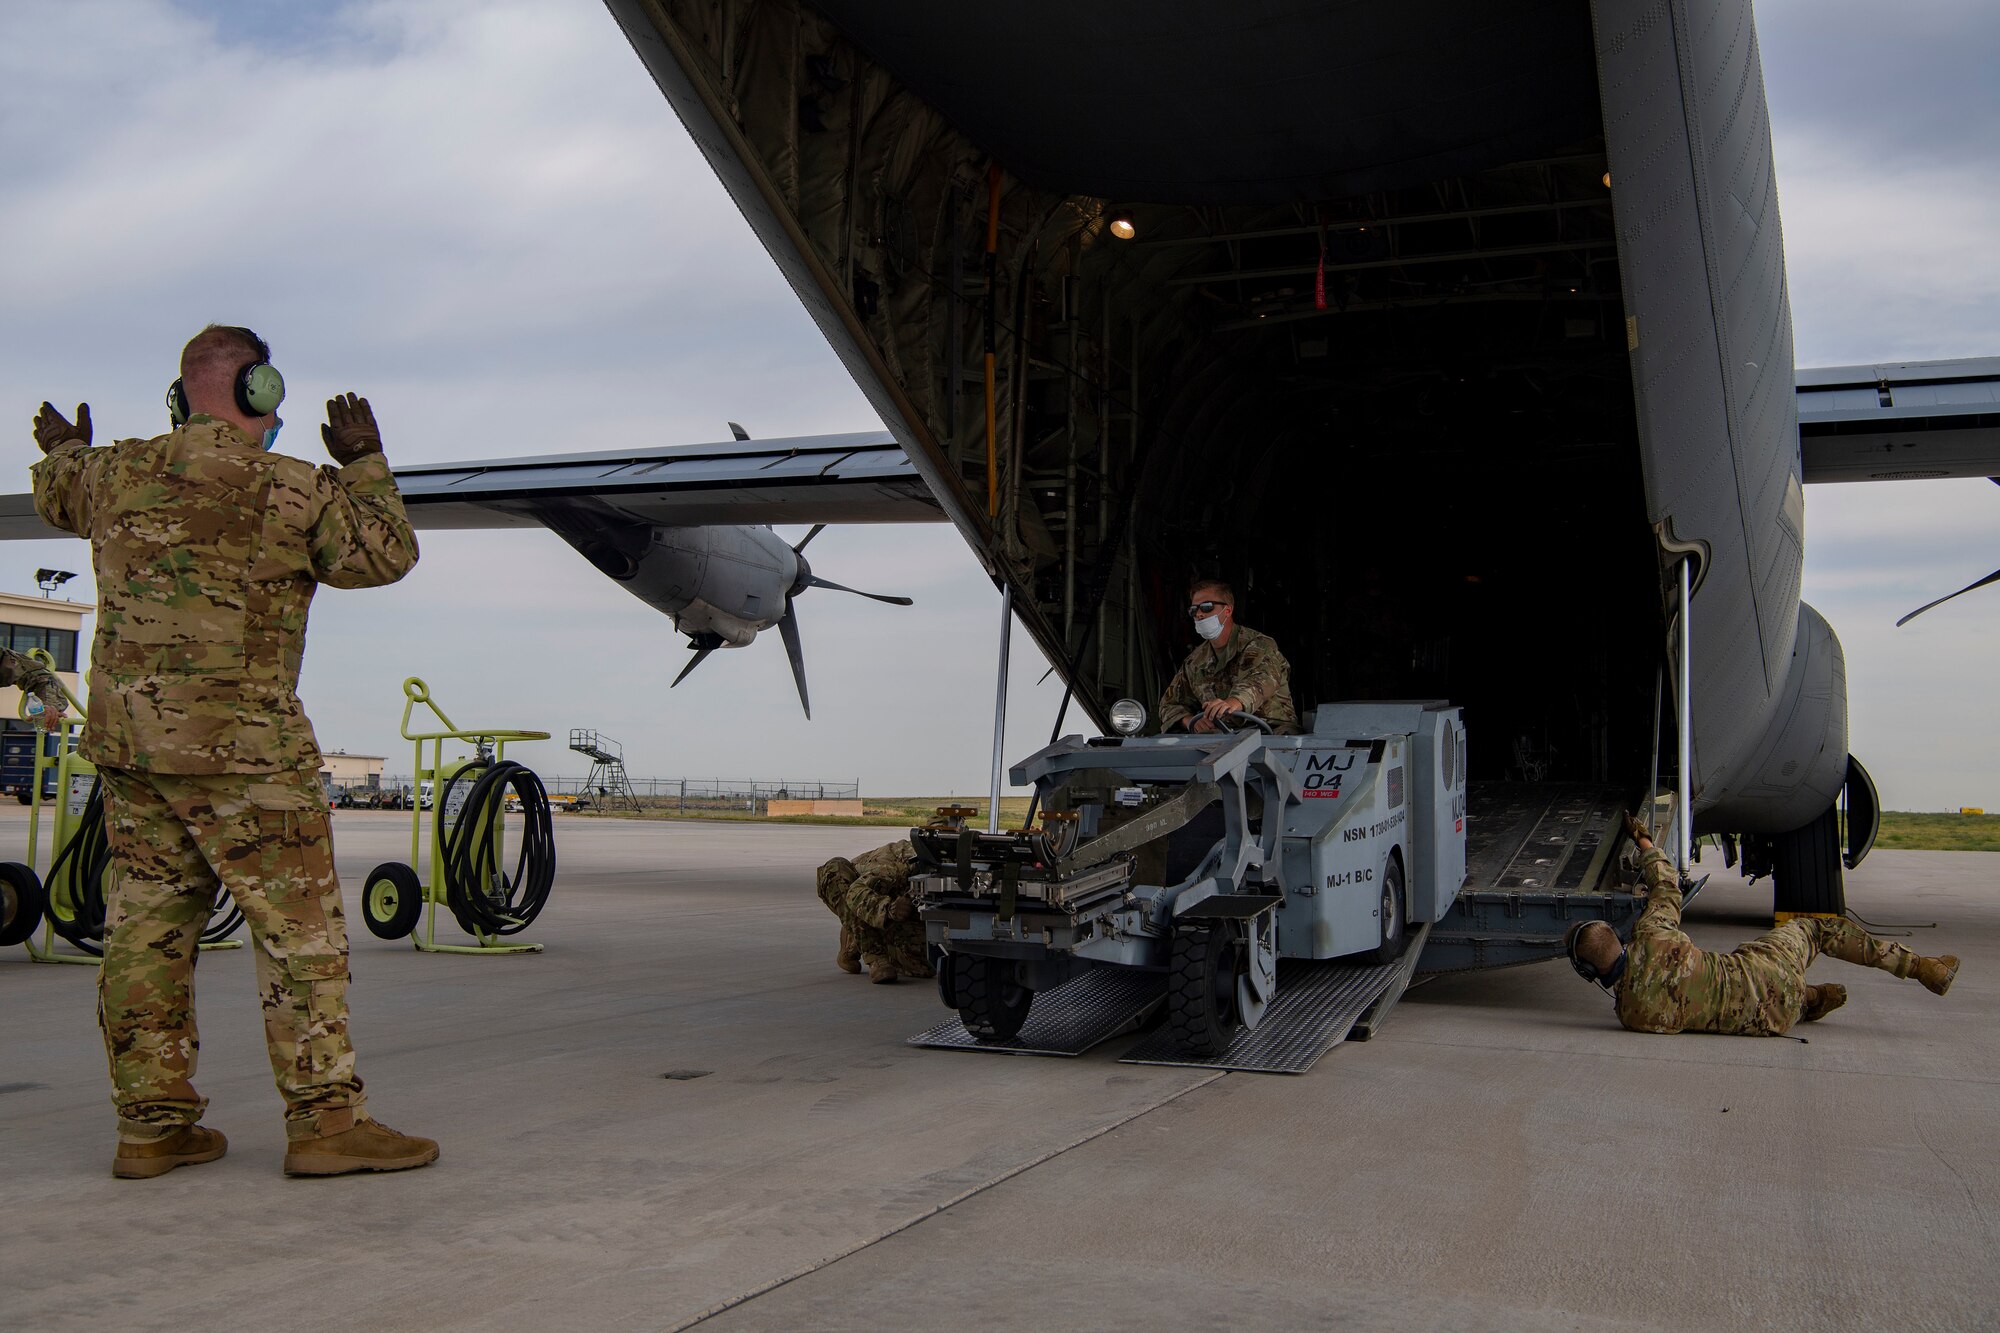 Members from the 41st Airlift Squadron and the 140th Wing, Colorado Air National Guard load cargo onto a C-130J Super Hercules during pre-deployment training at Buckley Air Force Base, Colorado, July 27, 2020. The 4/12 deployment initiative, which was developed in 2019 between airlift squadrons from Dyess AFB, Texas and Little Rock AFB, allowing each squadron a full year of dwell time followed by a four-month rotation to their respective area of responsibility. (U.S. Air Force photo by Airman 1st Class Aaron Irvin)